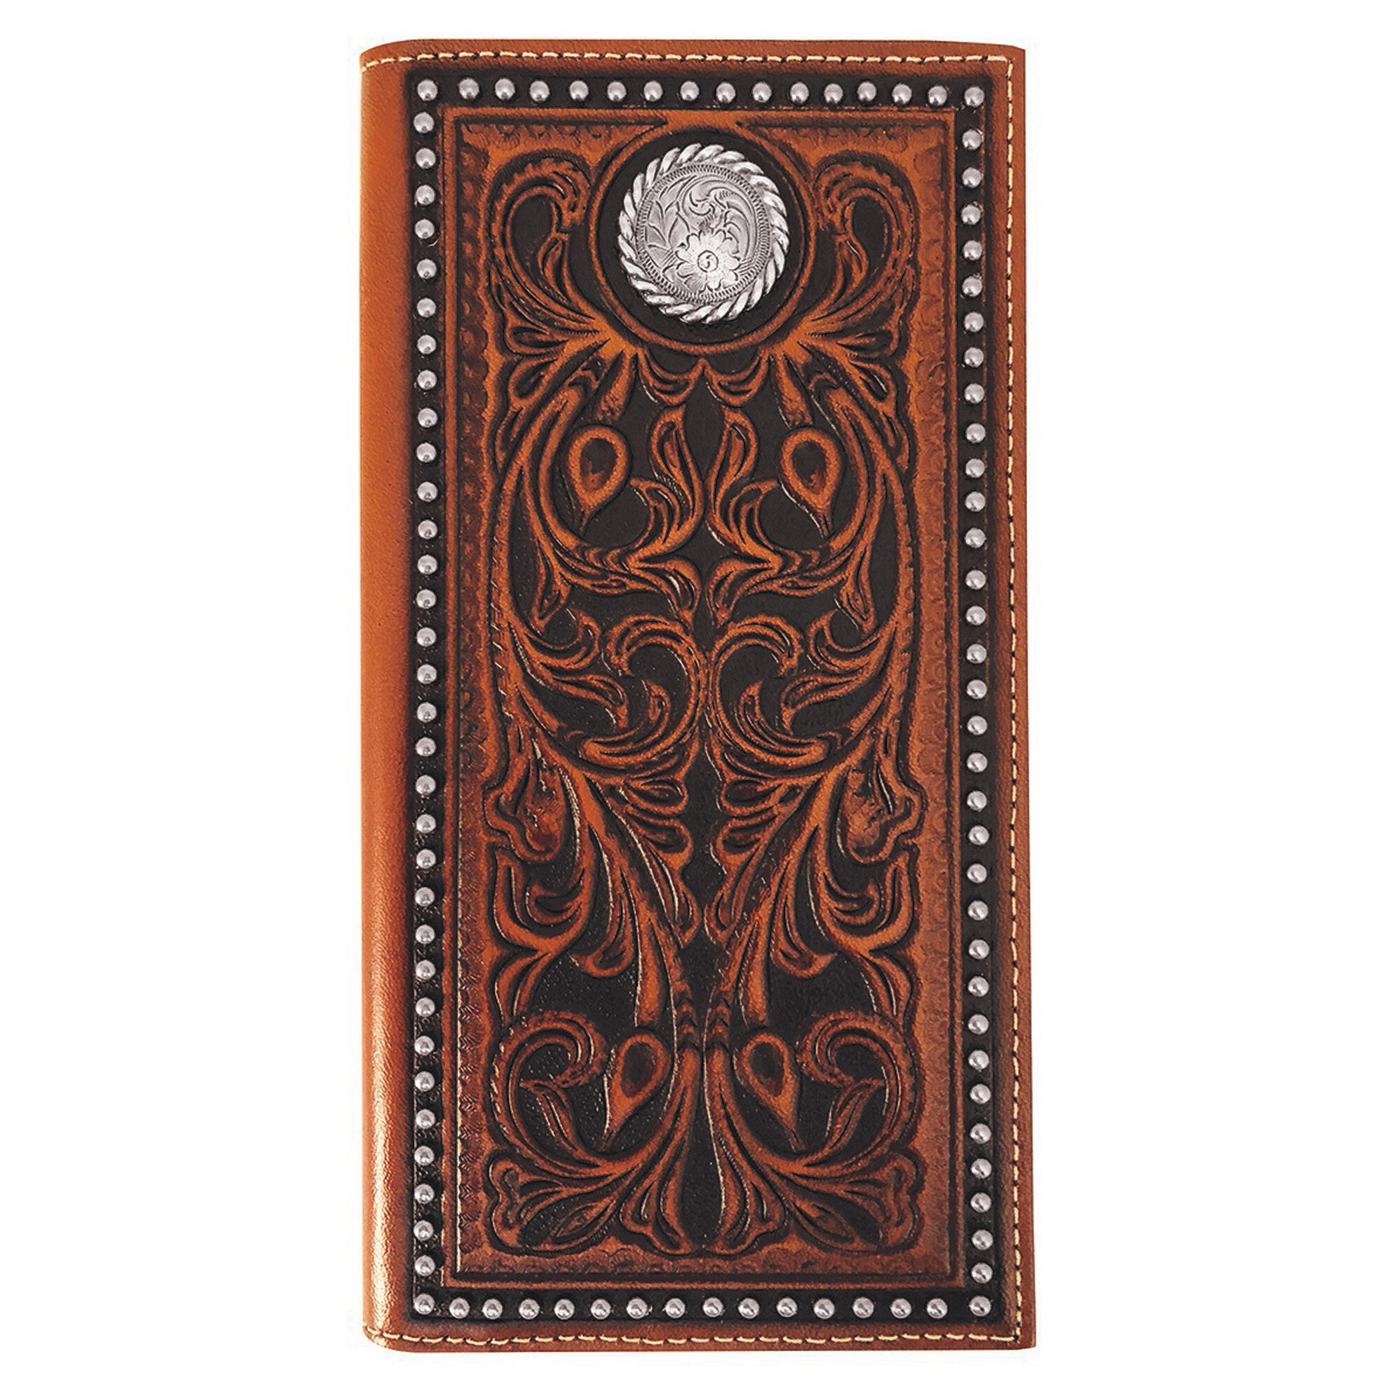 Roper | Rodeo Wallet | Tooled Leather | Tan